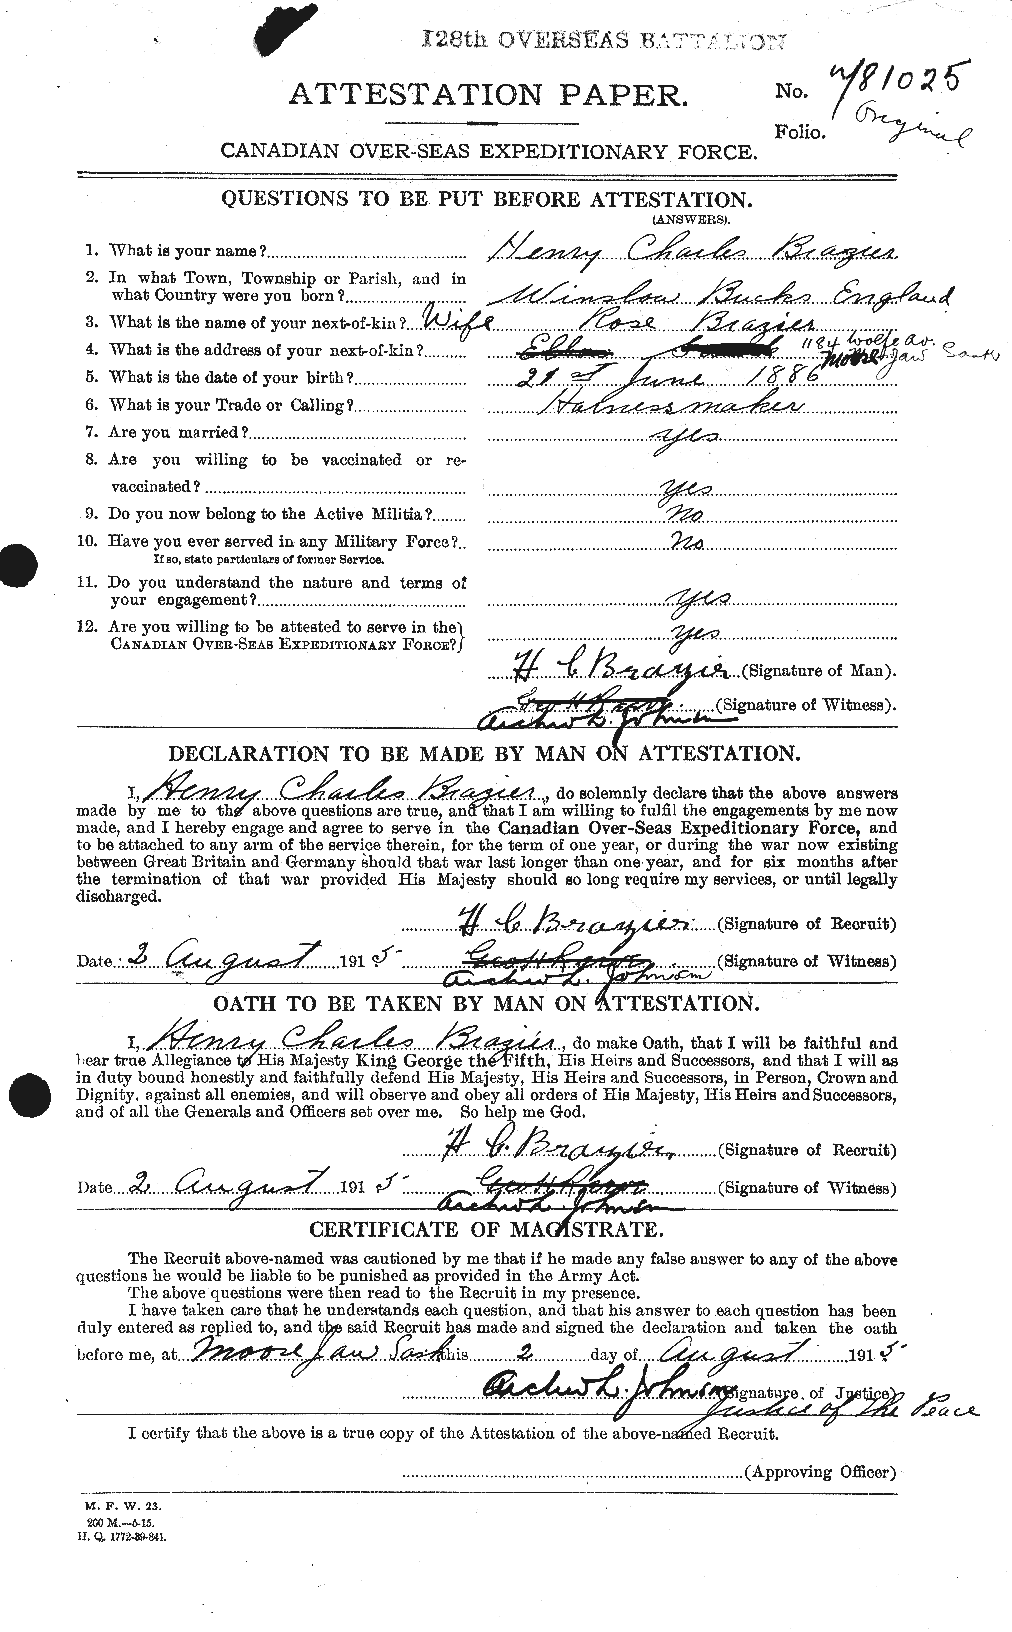 Personnel Records of the First World War - CEF 262483a